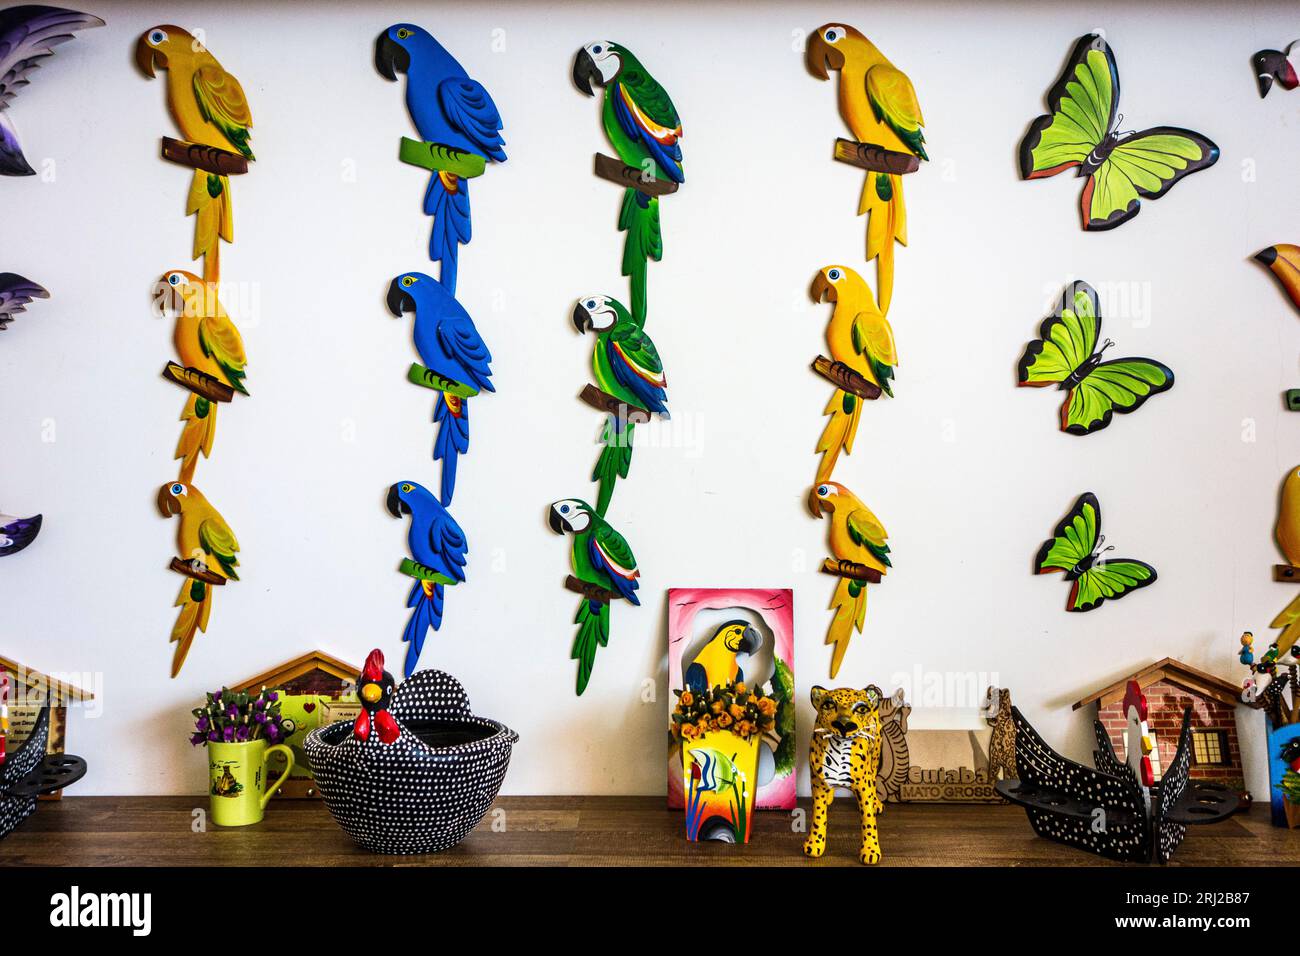 Wall art and toys at a Souvenir or gift shop in Mato Grosso, Brazil Stock Photo